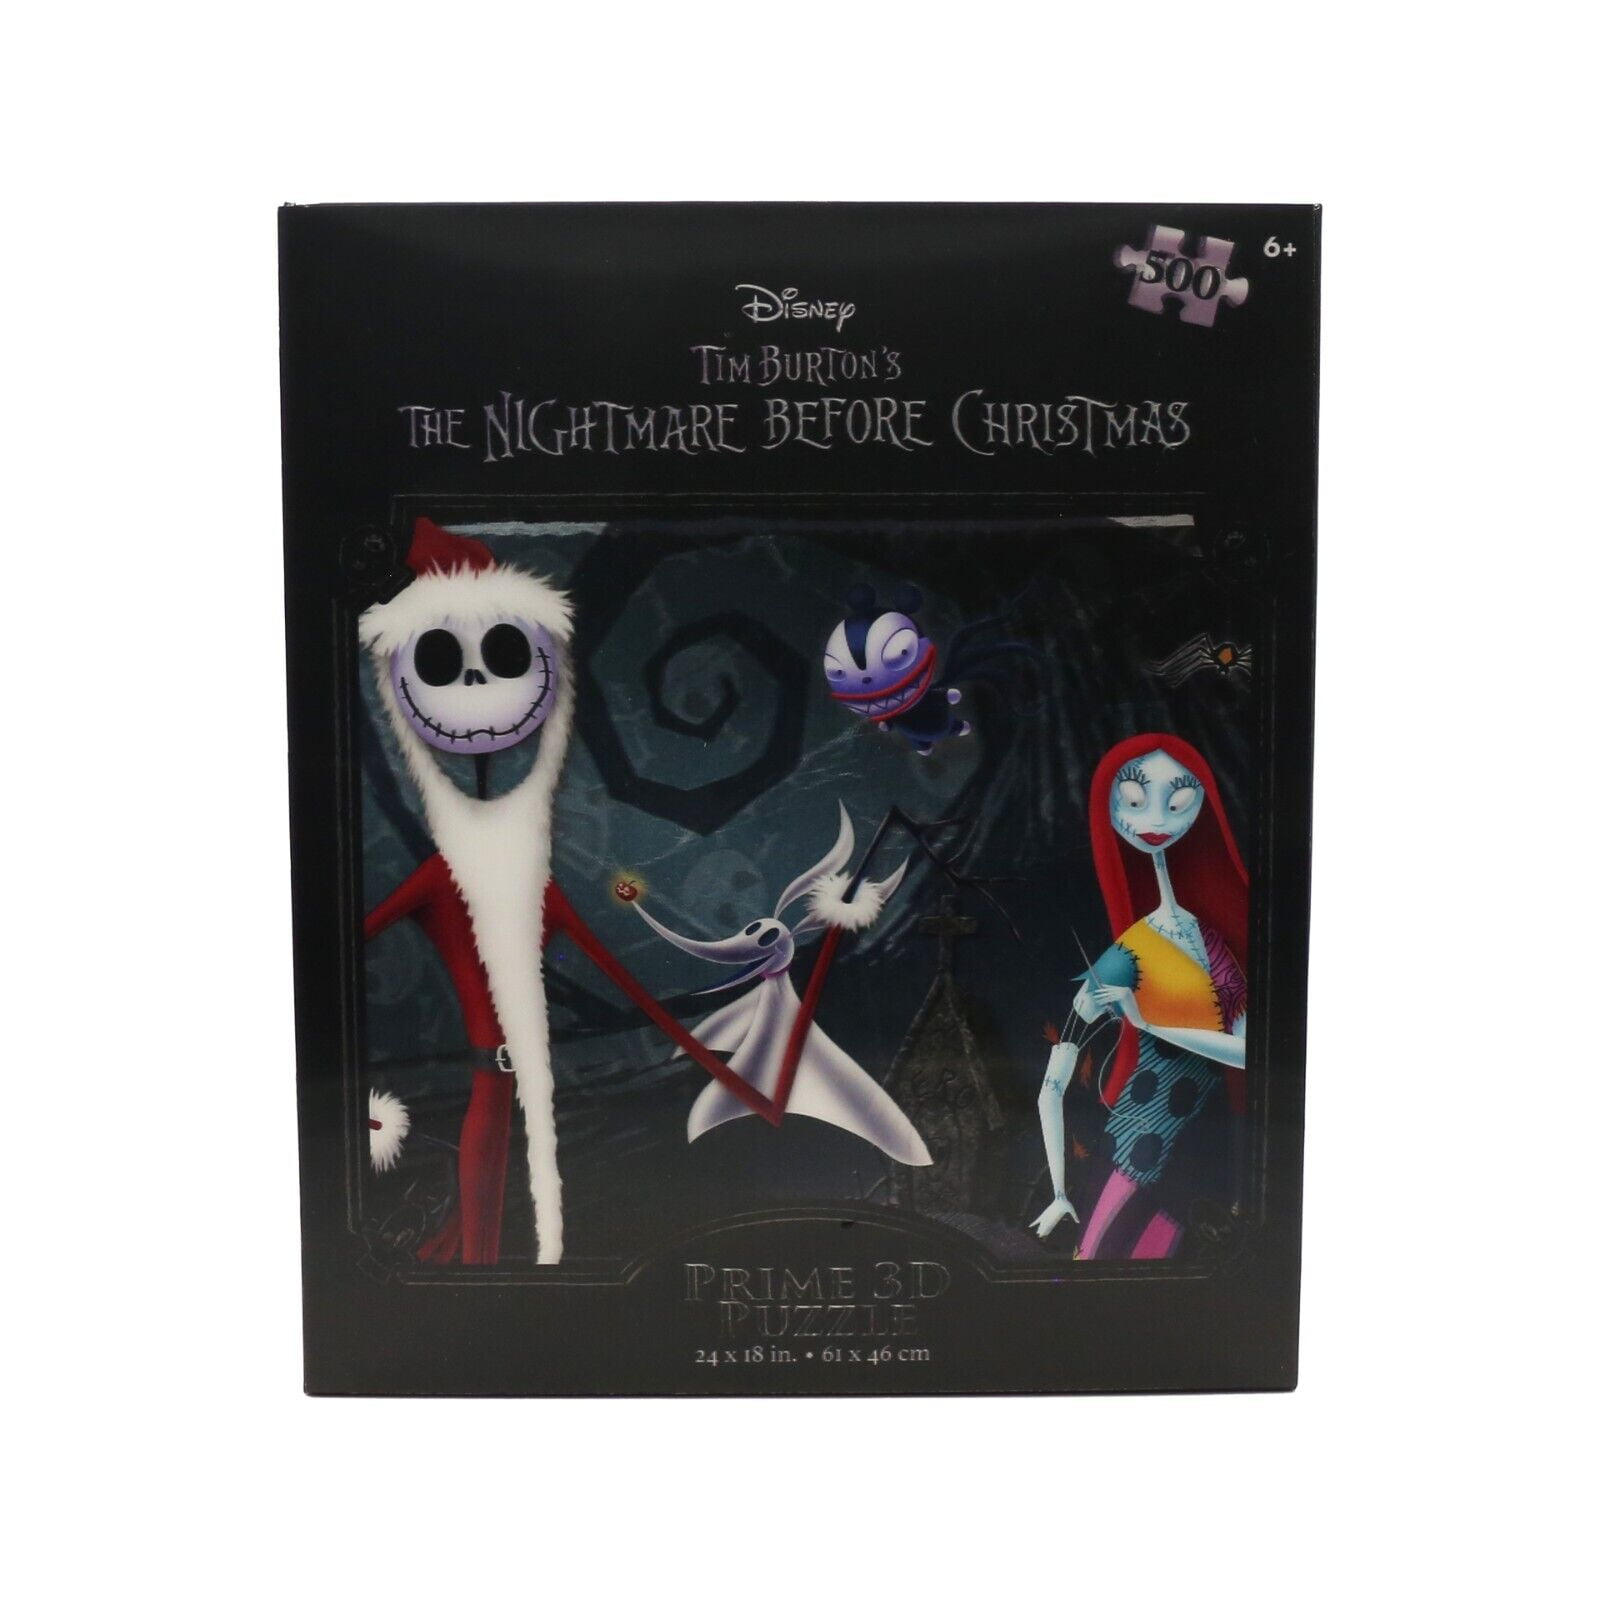 The Nightmare Before Christmas Disney 3D Jigsaw Puzzle in Tin Book 35558  300pc 18x12